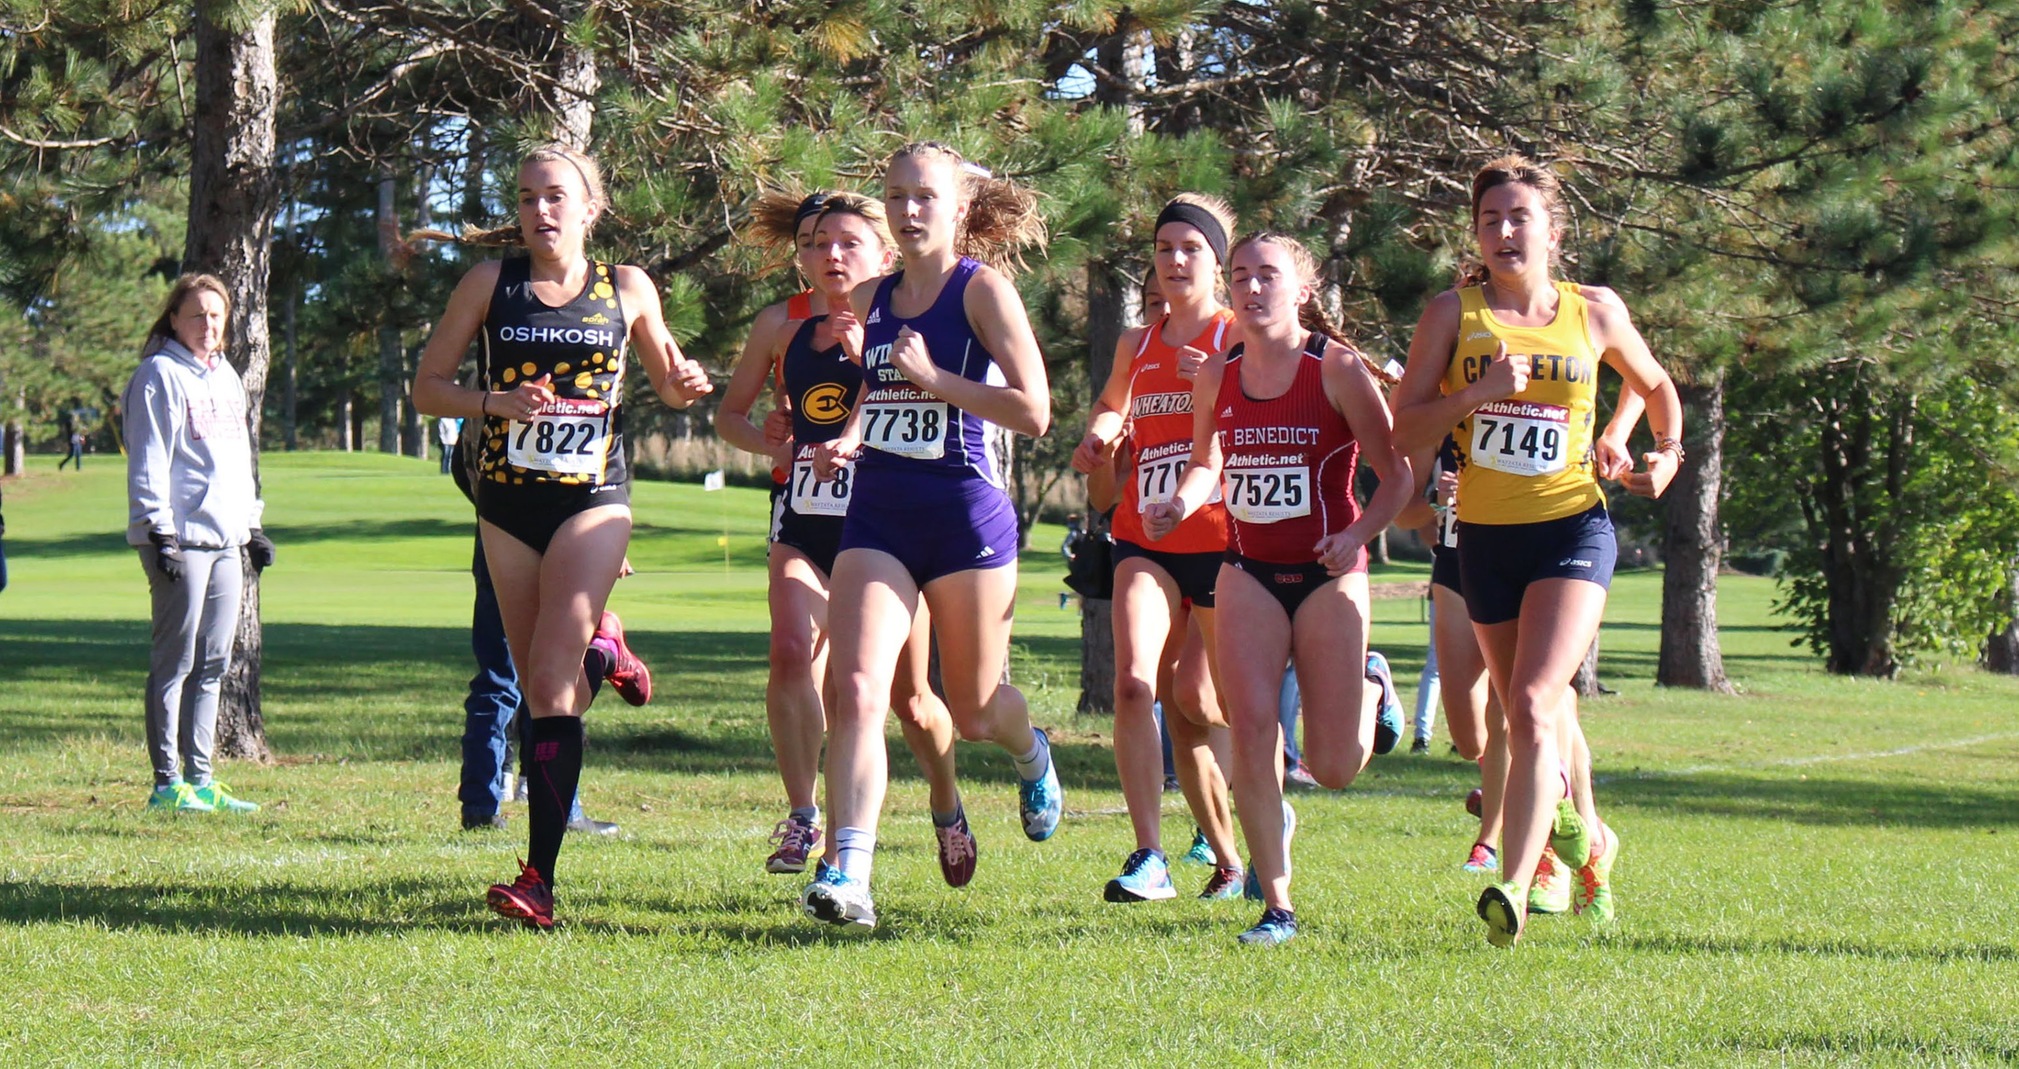 Evlyn Noone finished eighth among 335 runners at the Blugold Invitational.